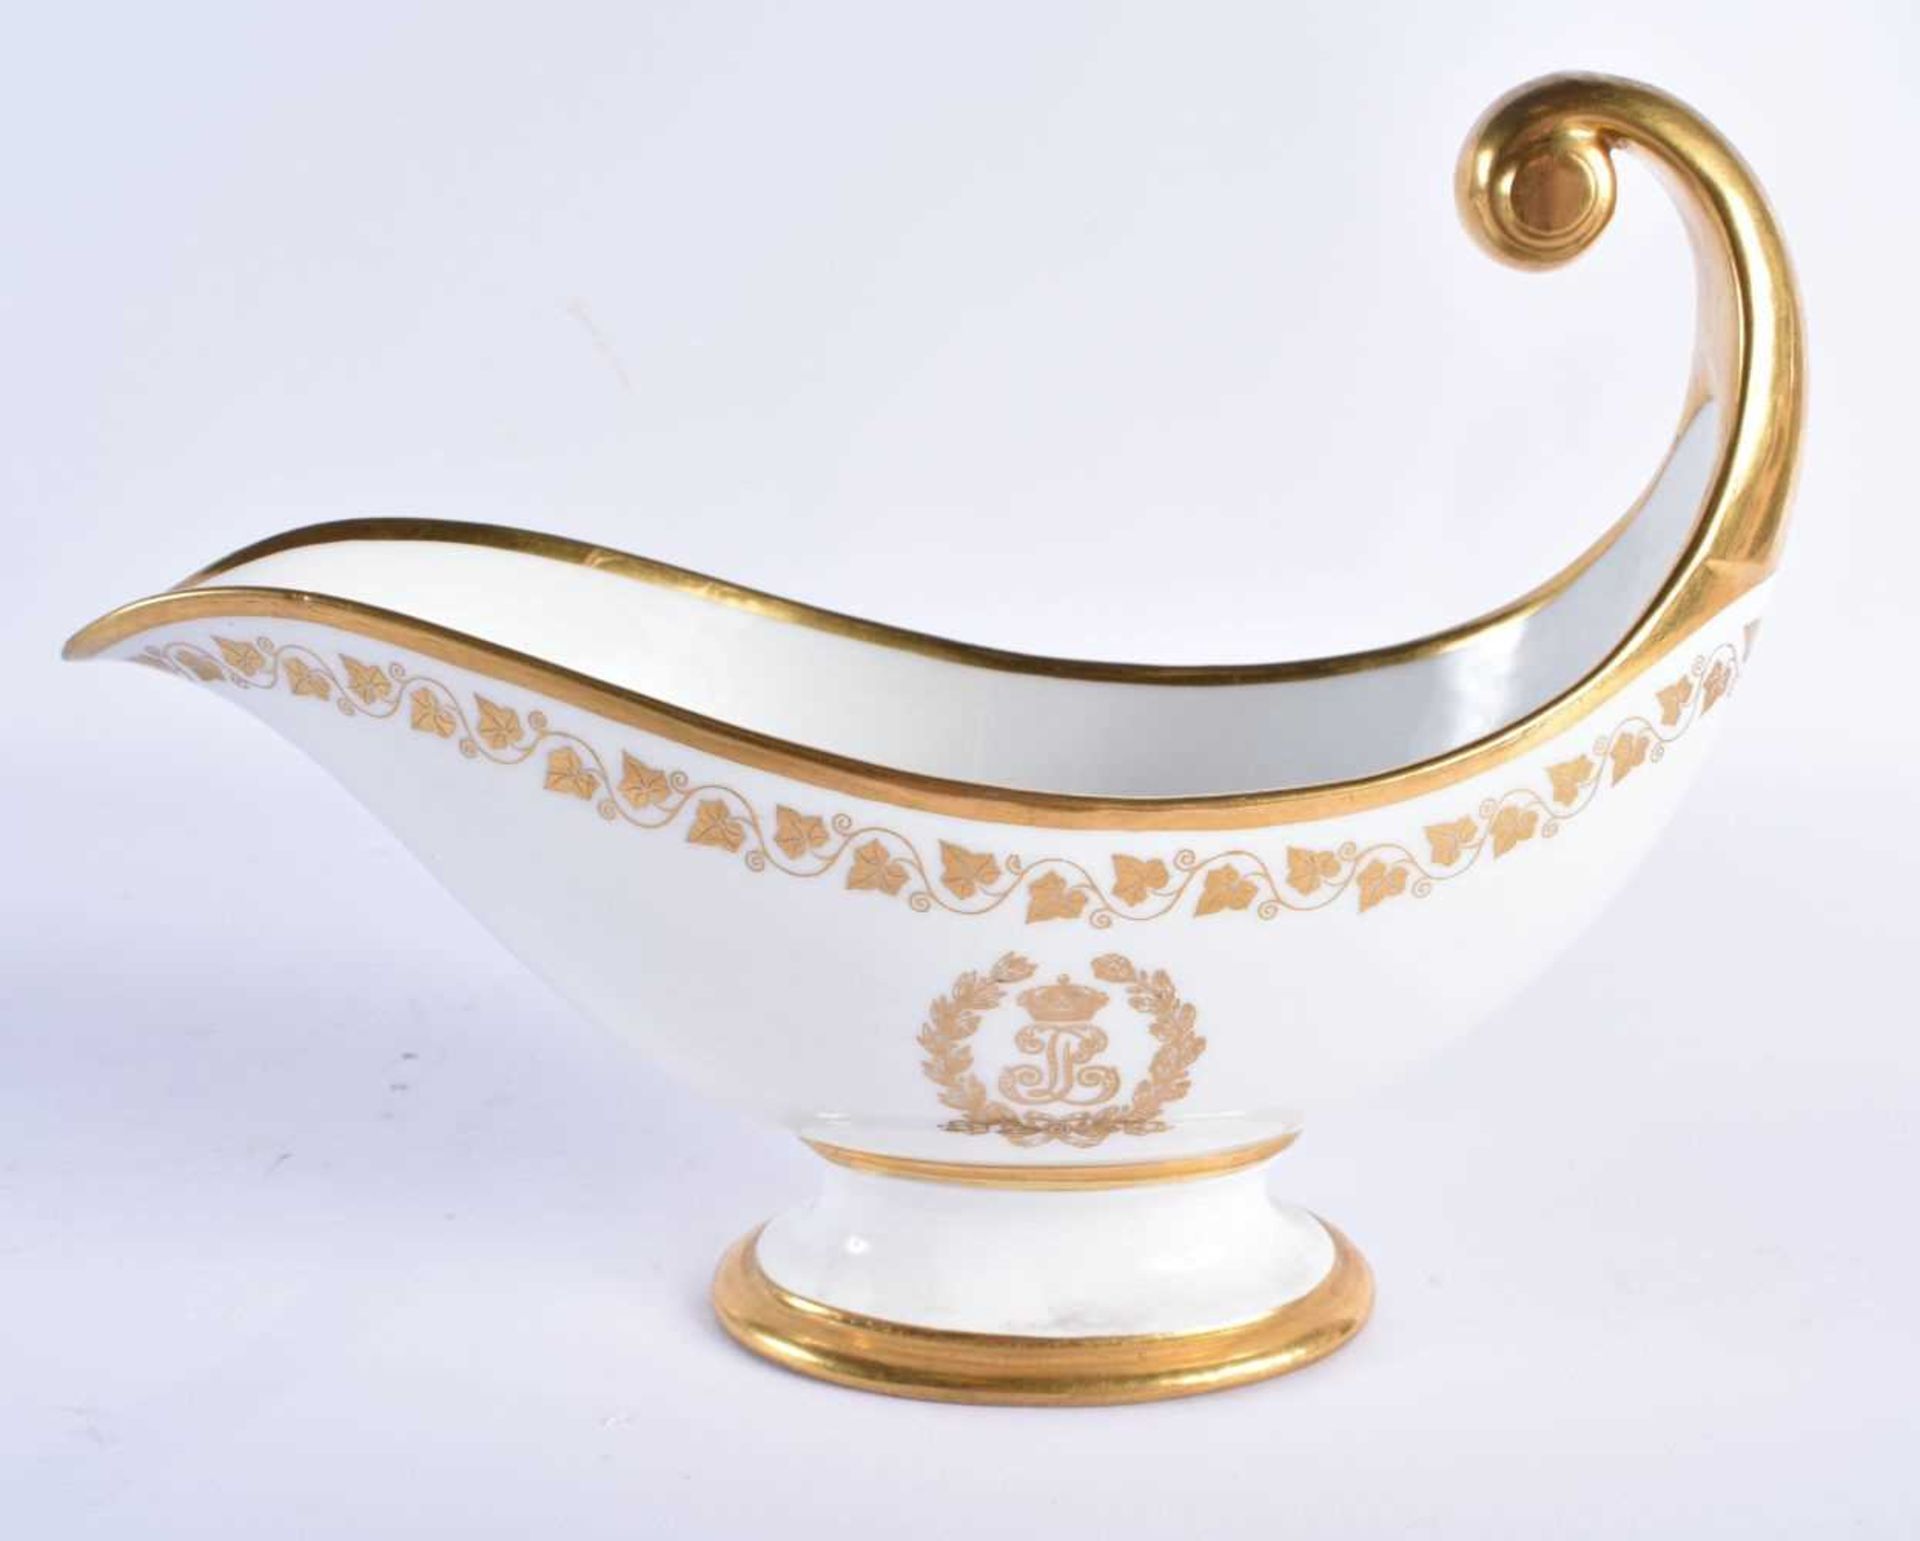 A LATE 19TH CENTURY FRENCH SEVRES PORCELAIN SAUCE BOAT painted with gilded flowers and trailing